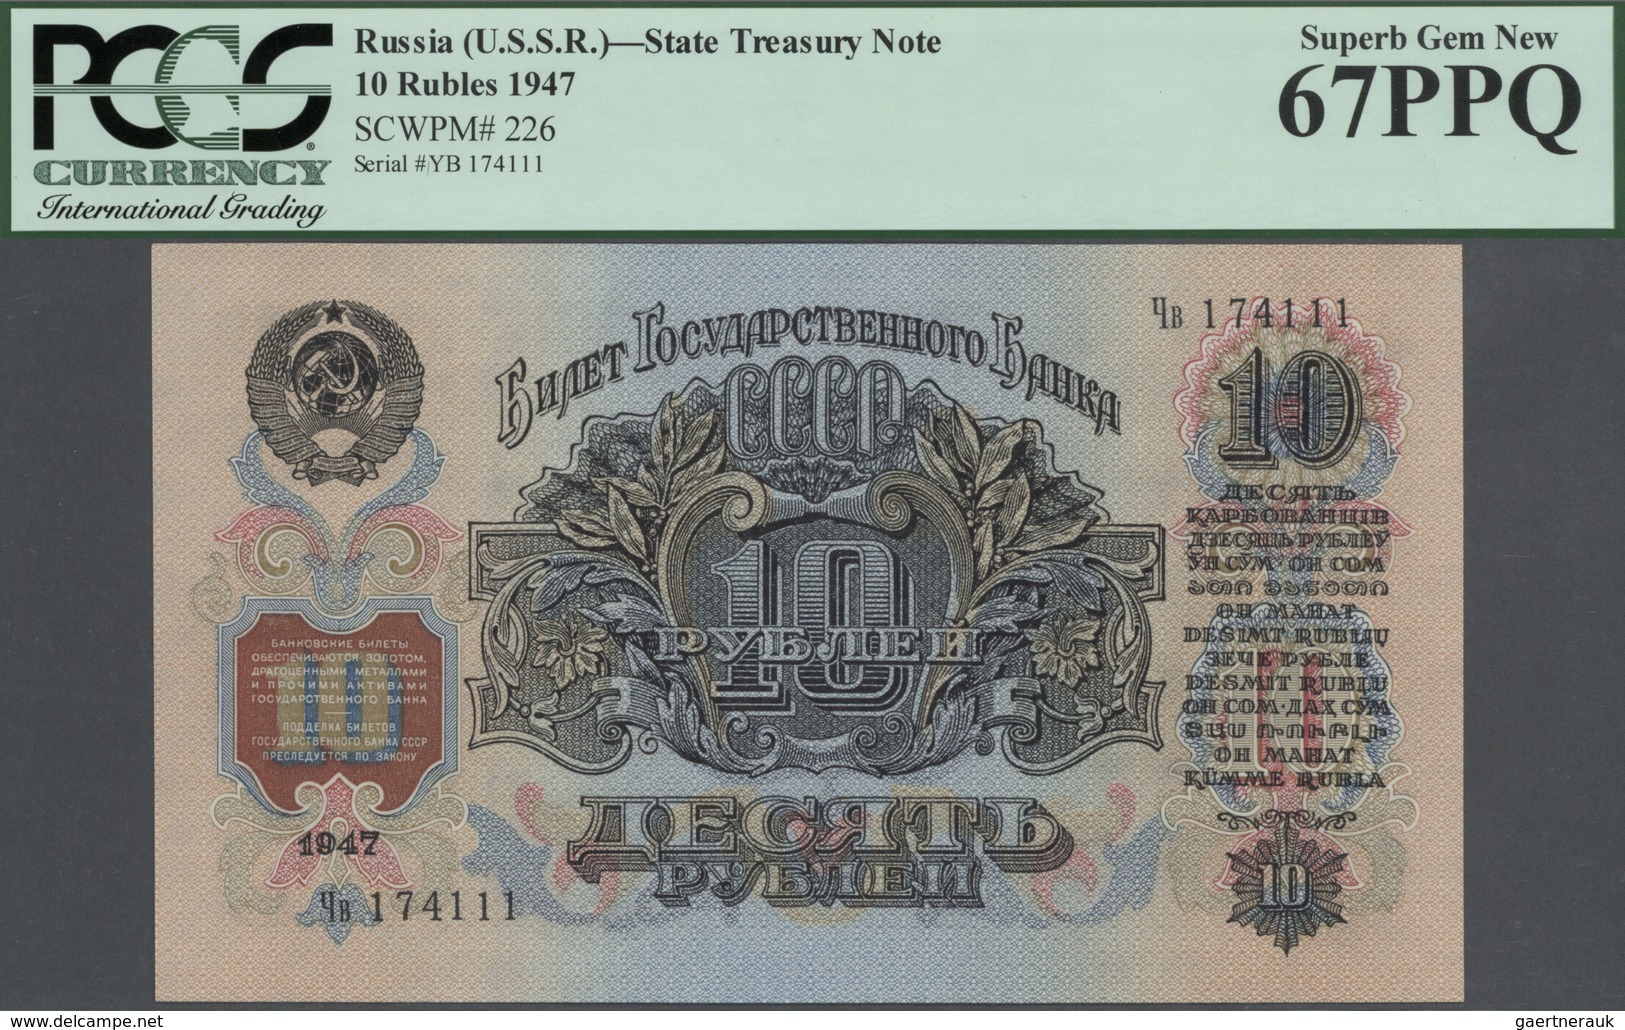 02270 Russia / Russland: Set with 5 Banknotes 1 Ruble 1947 (1957) P.217 PCGS 67, 3 Rubles 1947 P.218 PCGS